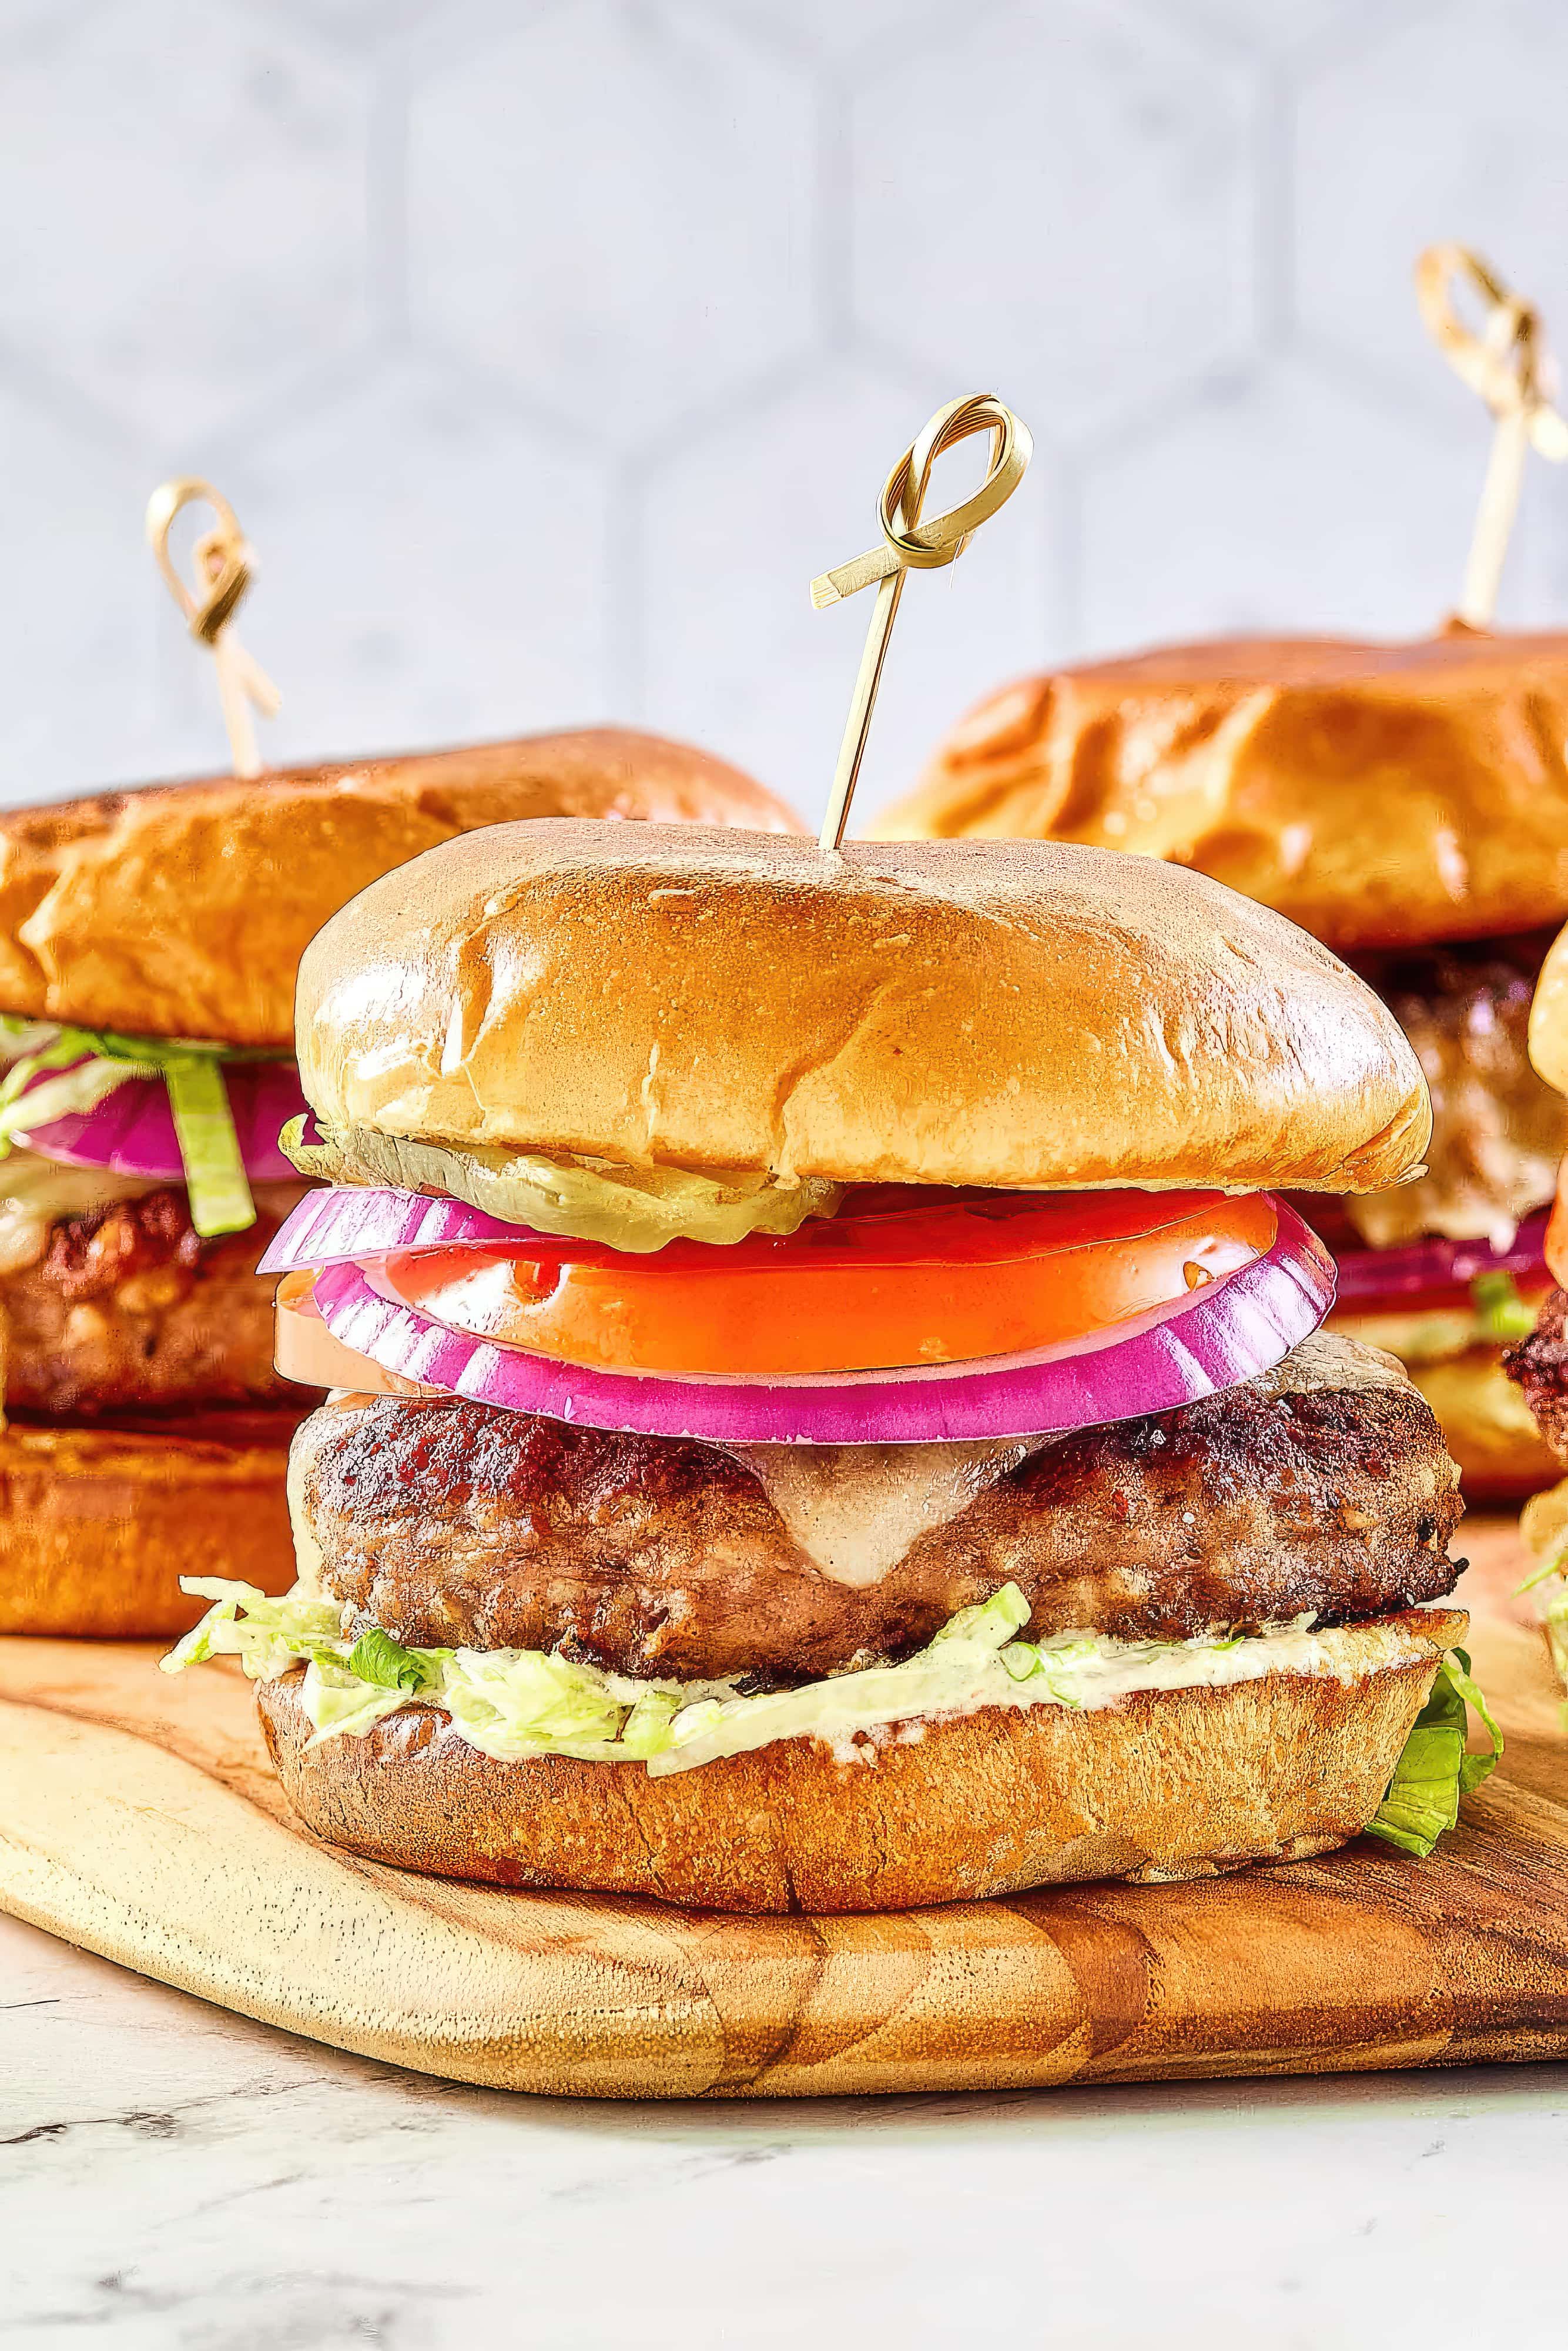 Assorted hamburgers neatly arranged on a wooden cutting board, showcasing their savory fillings and fresh ingredients